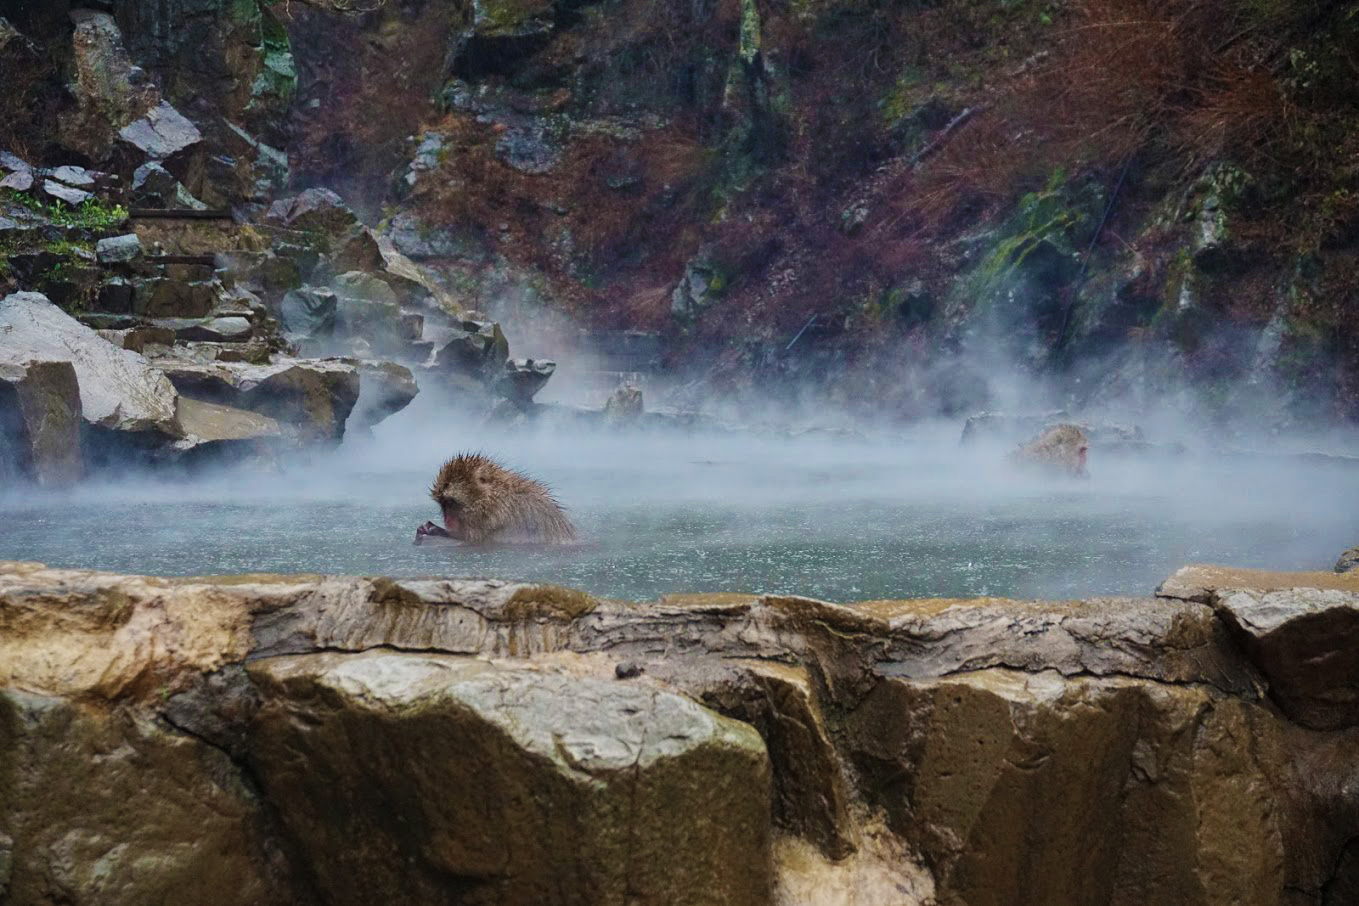 Snow Monkey Park, where there is a snow monkey in an Onsen